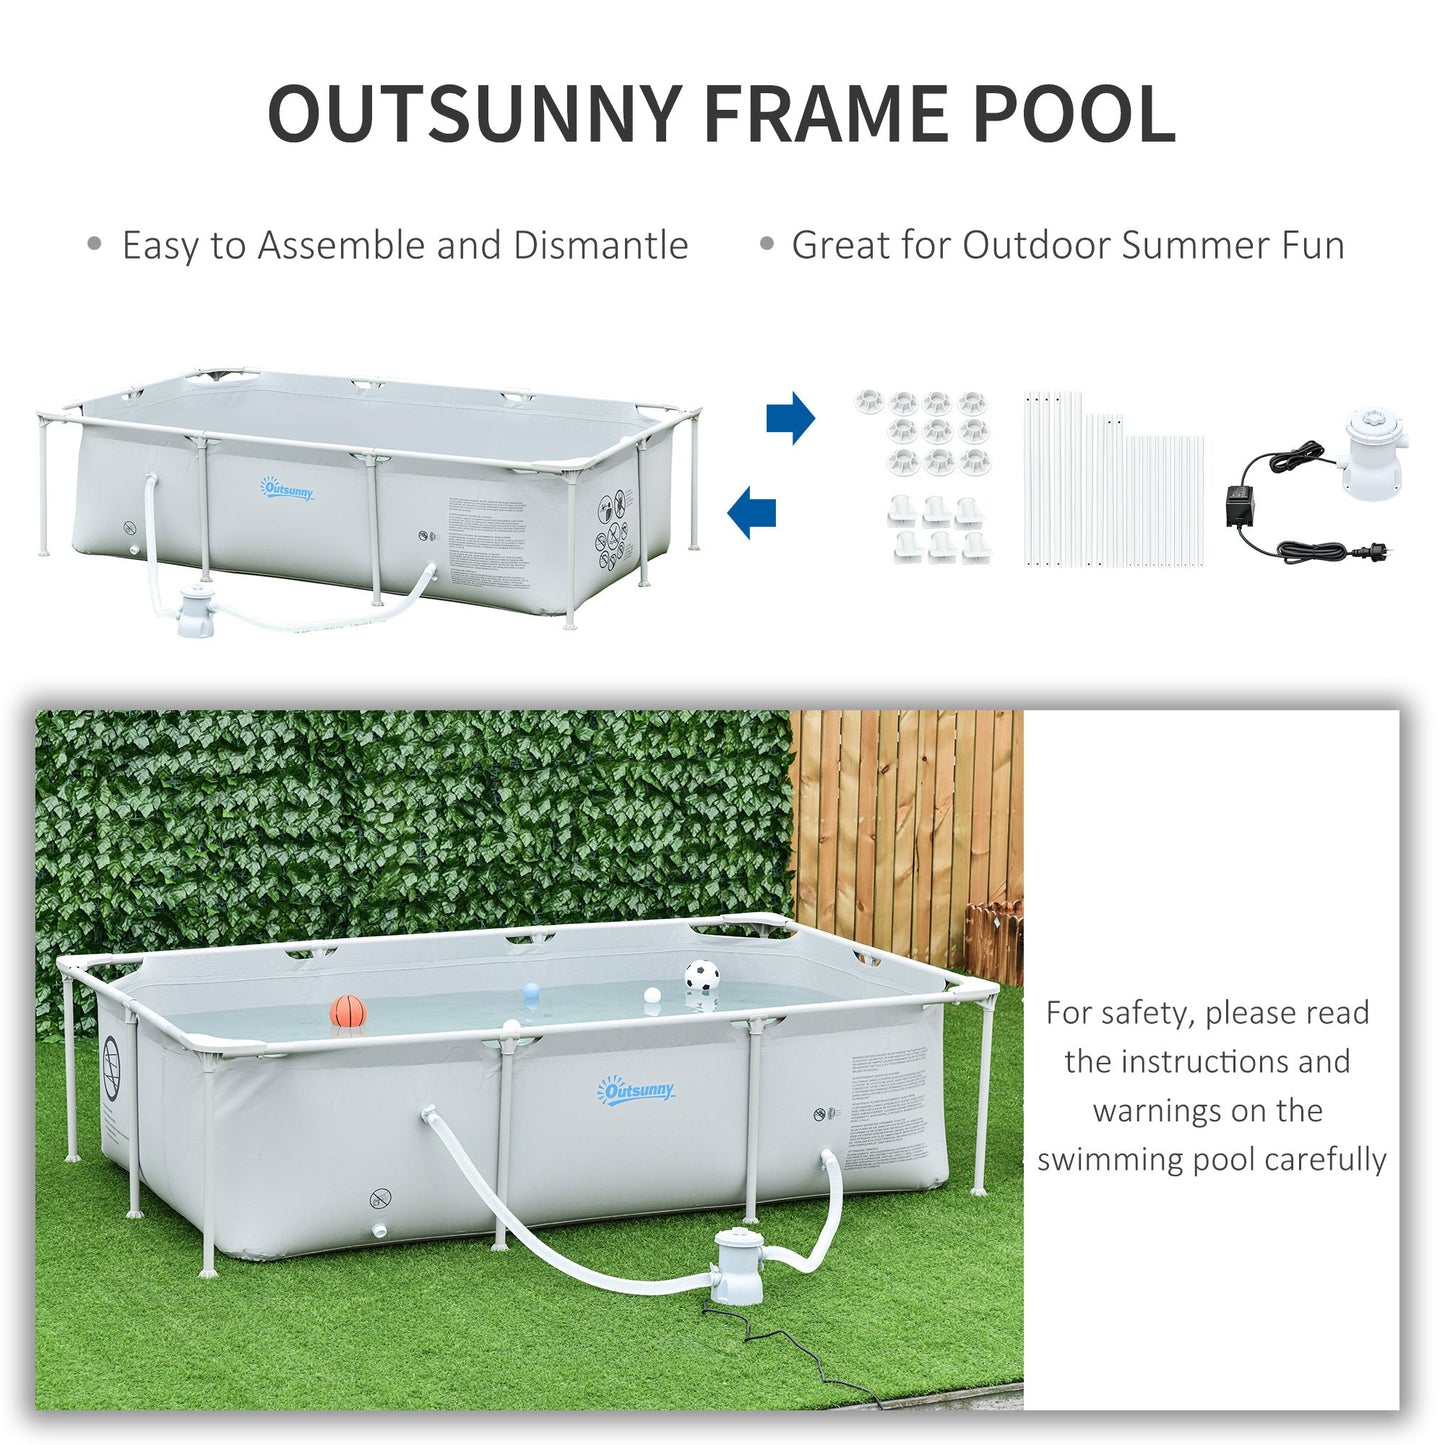 Outsunny Steel Frame Pool with Filter Pump and Filter Cartridge Rust Resistant Above Ground Pool with Reinforced Sidewalls, 252 x 152 x 65cm, Grey